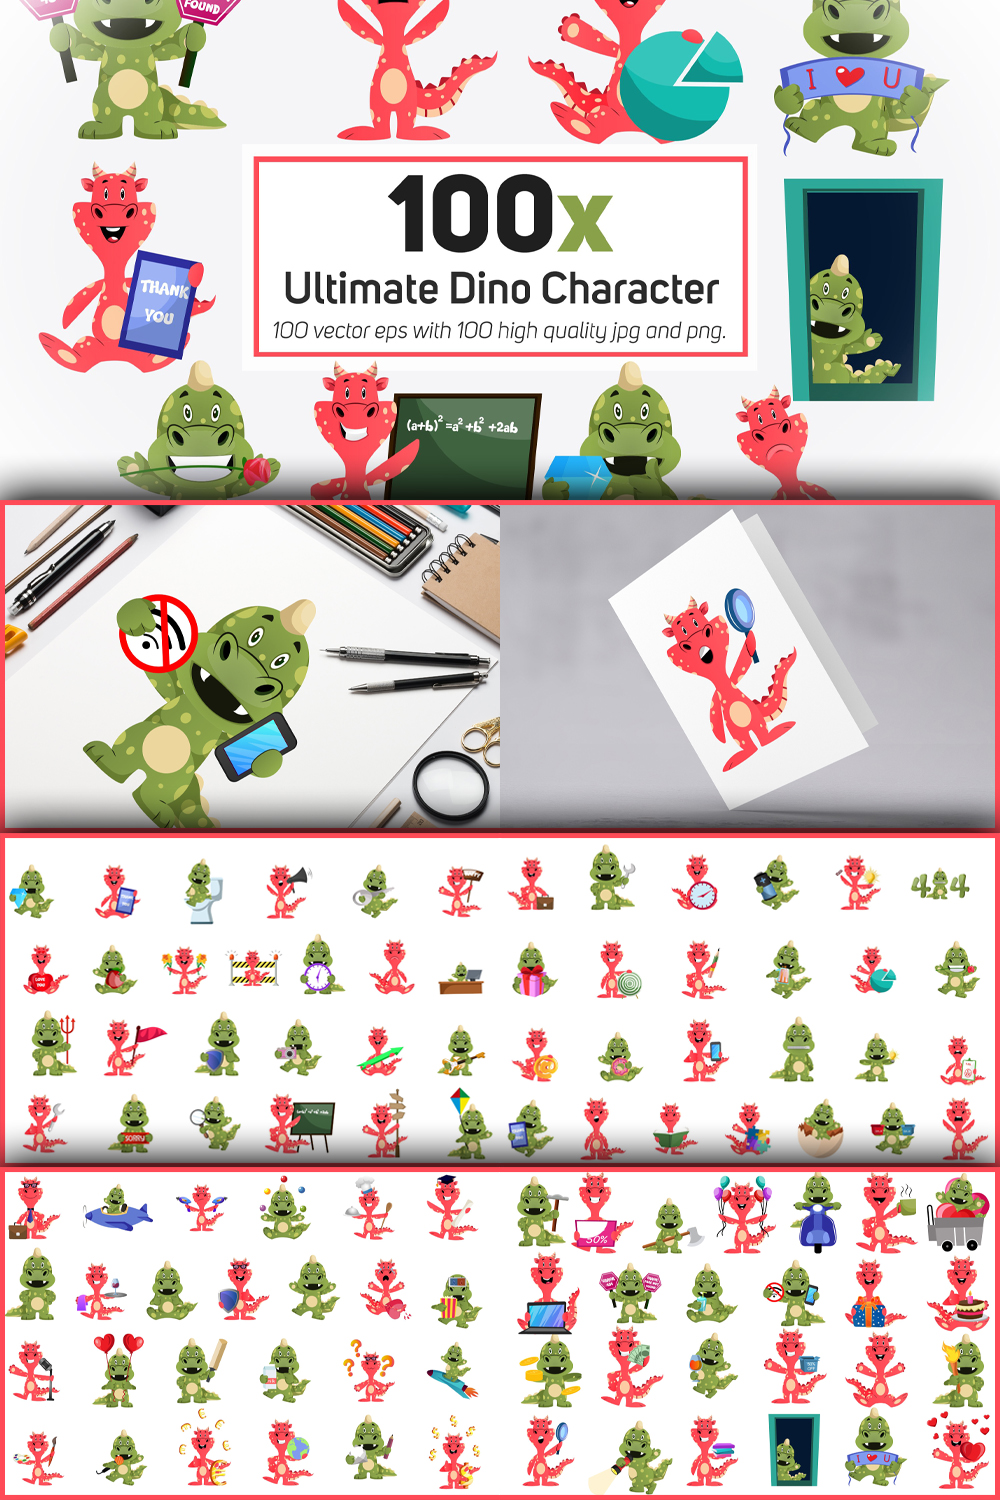 541769 100x ultimate dino character collection illustrati pinterest 1000 1500 7